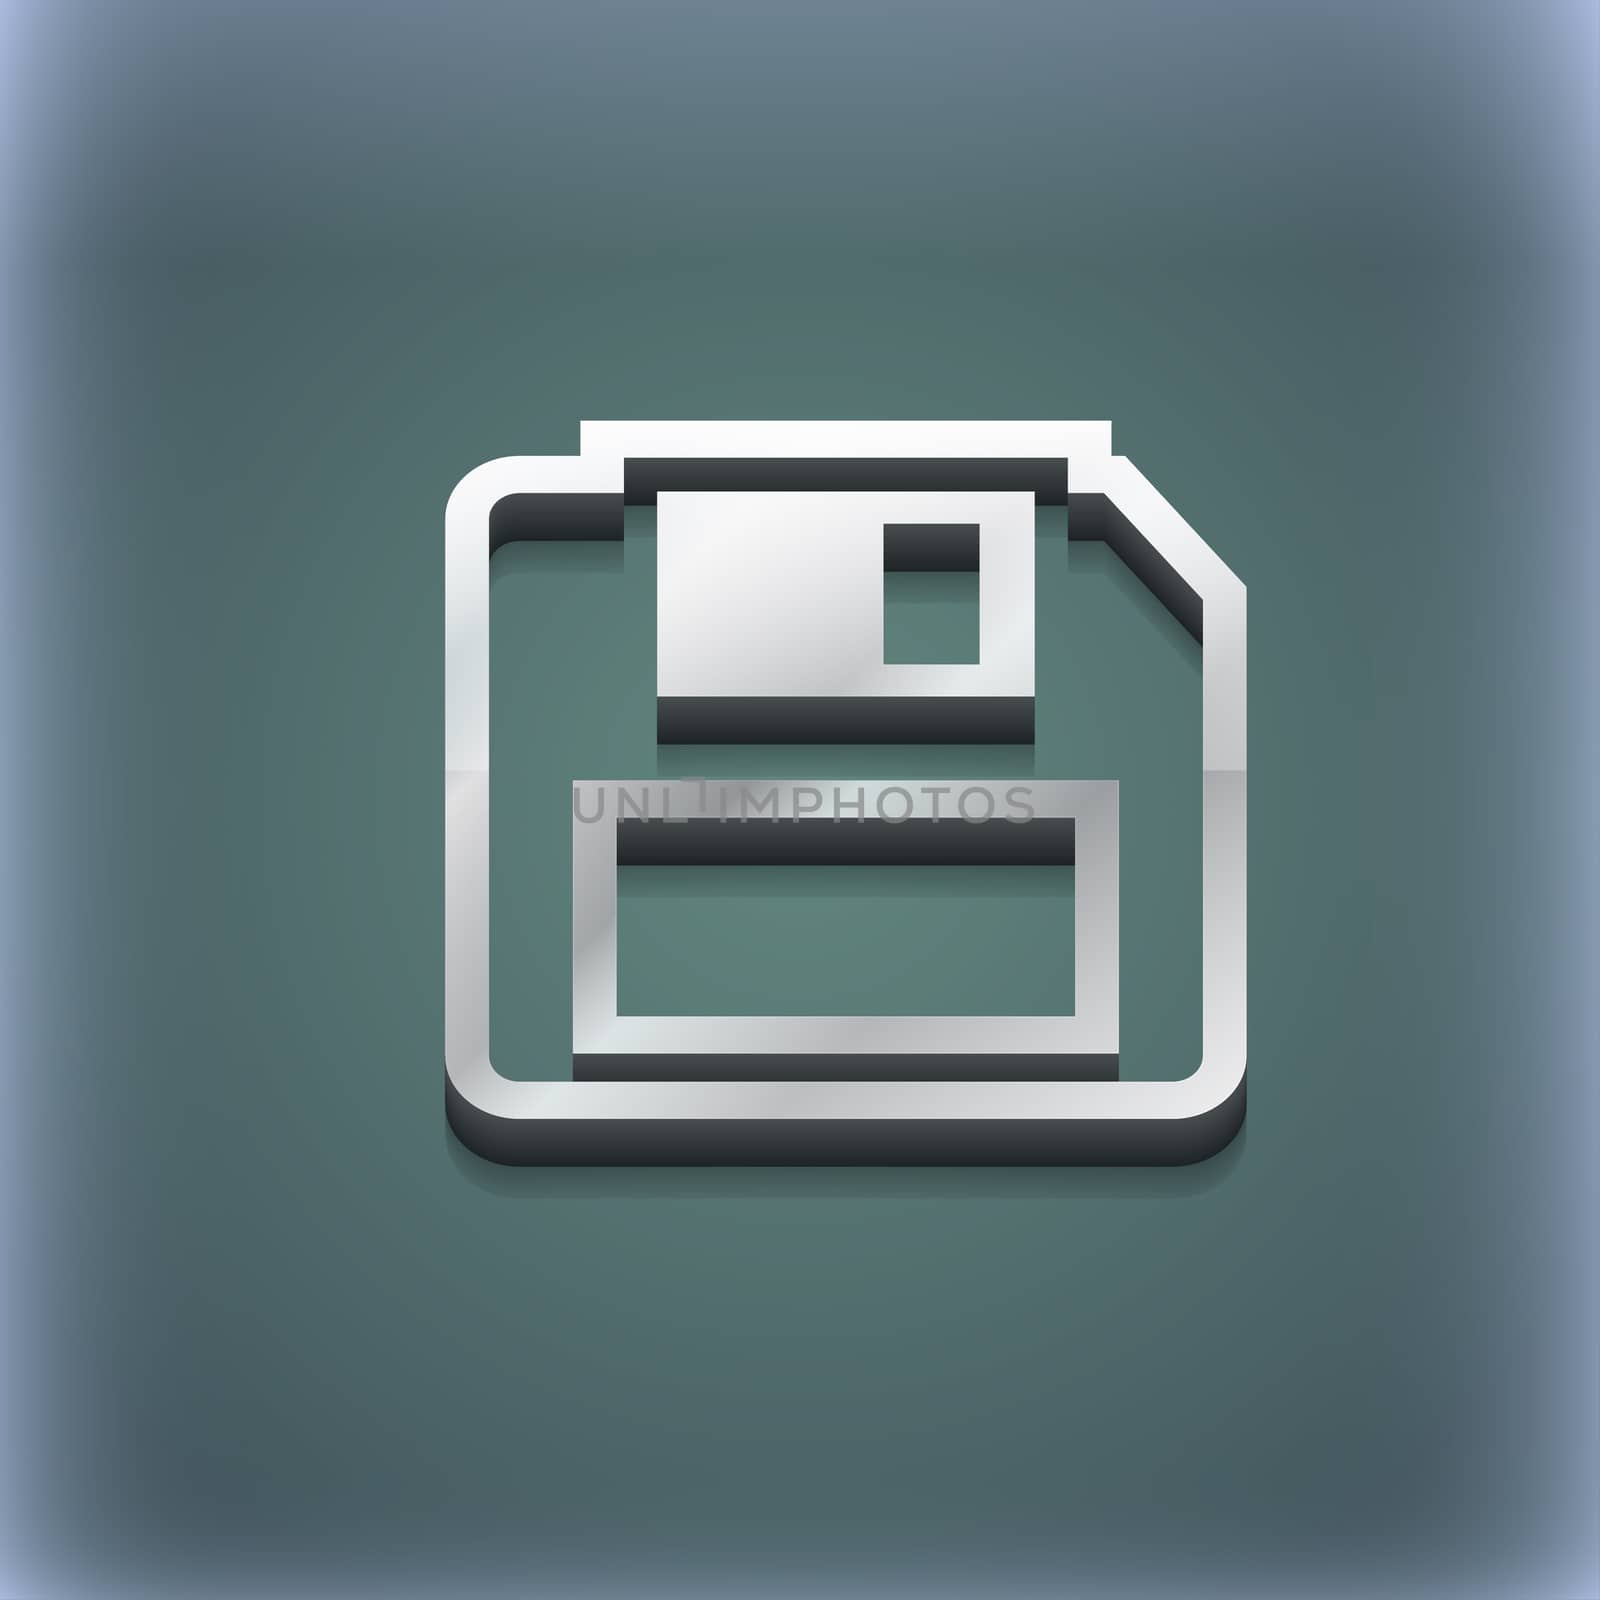 floppy disk icon symbol. 3D style. Trendy, modern design with space for your text illustration. Raster version